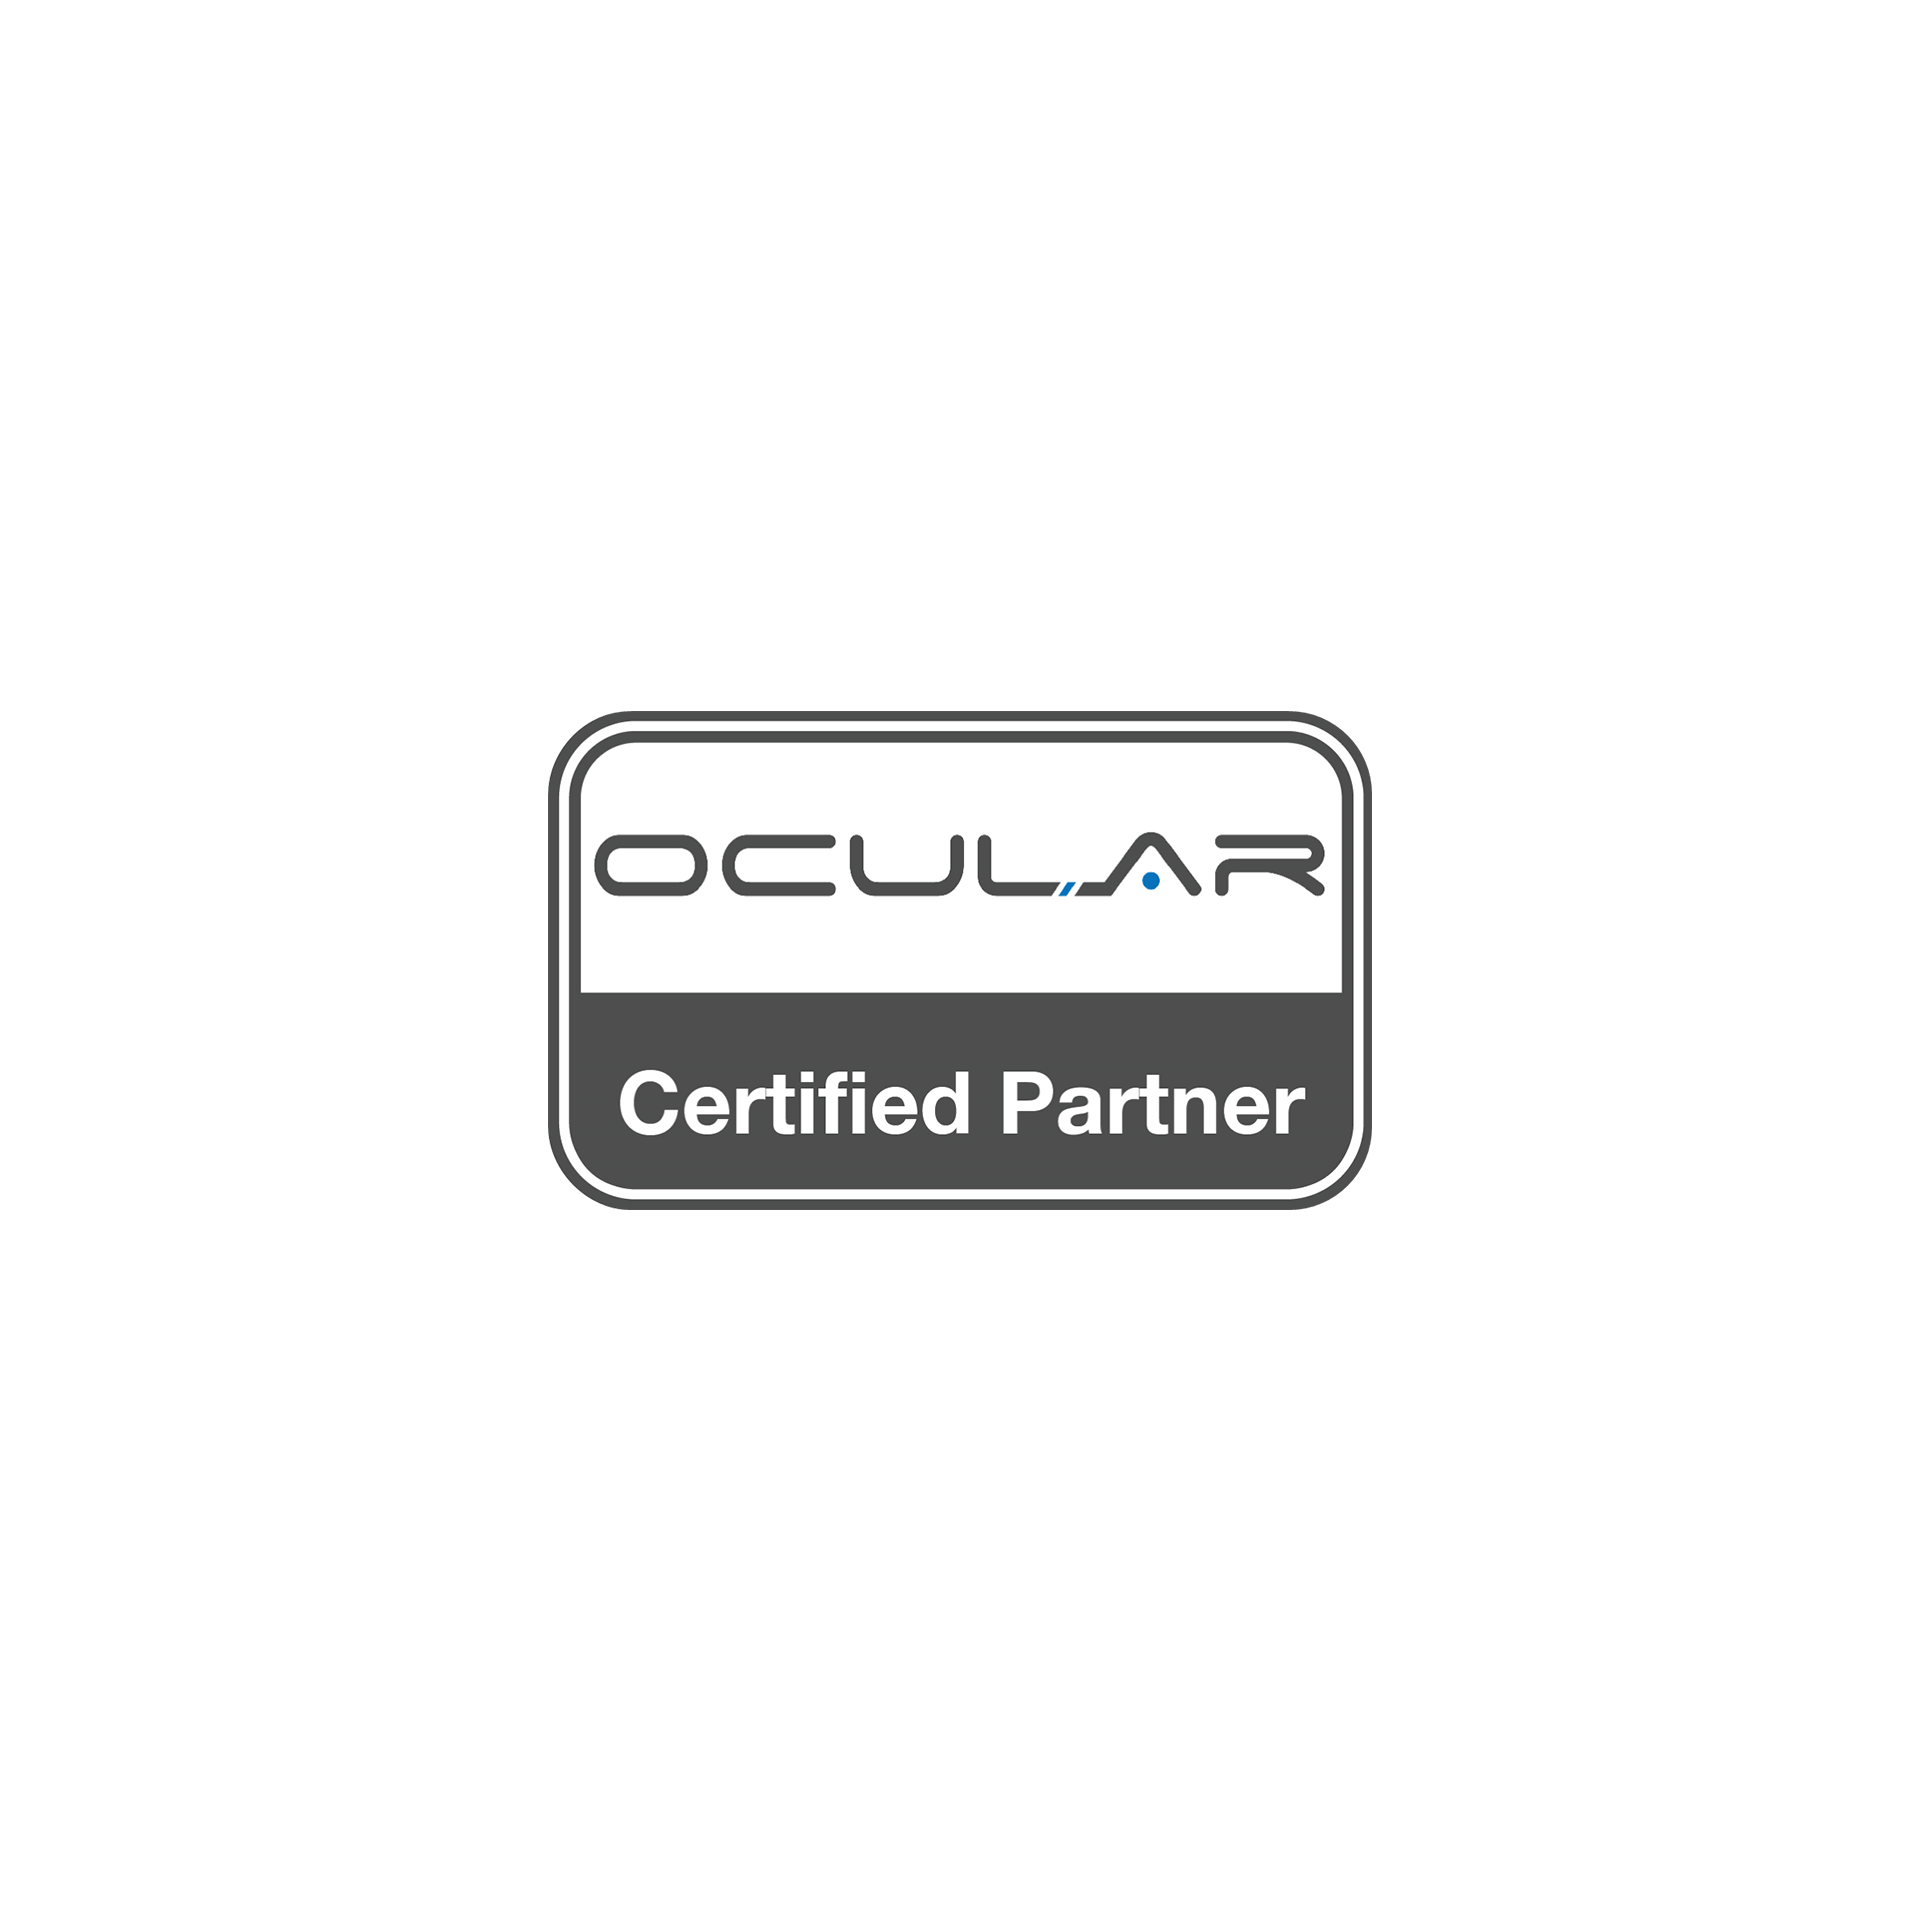 The logo for ocular is a certified partner.